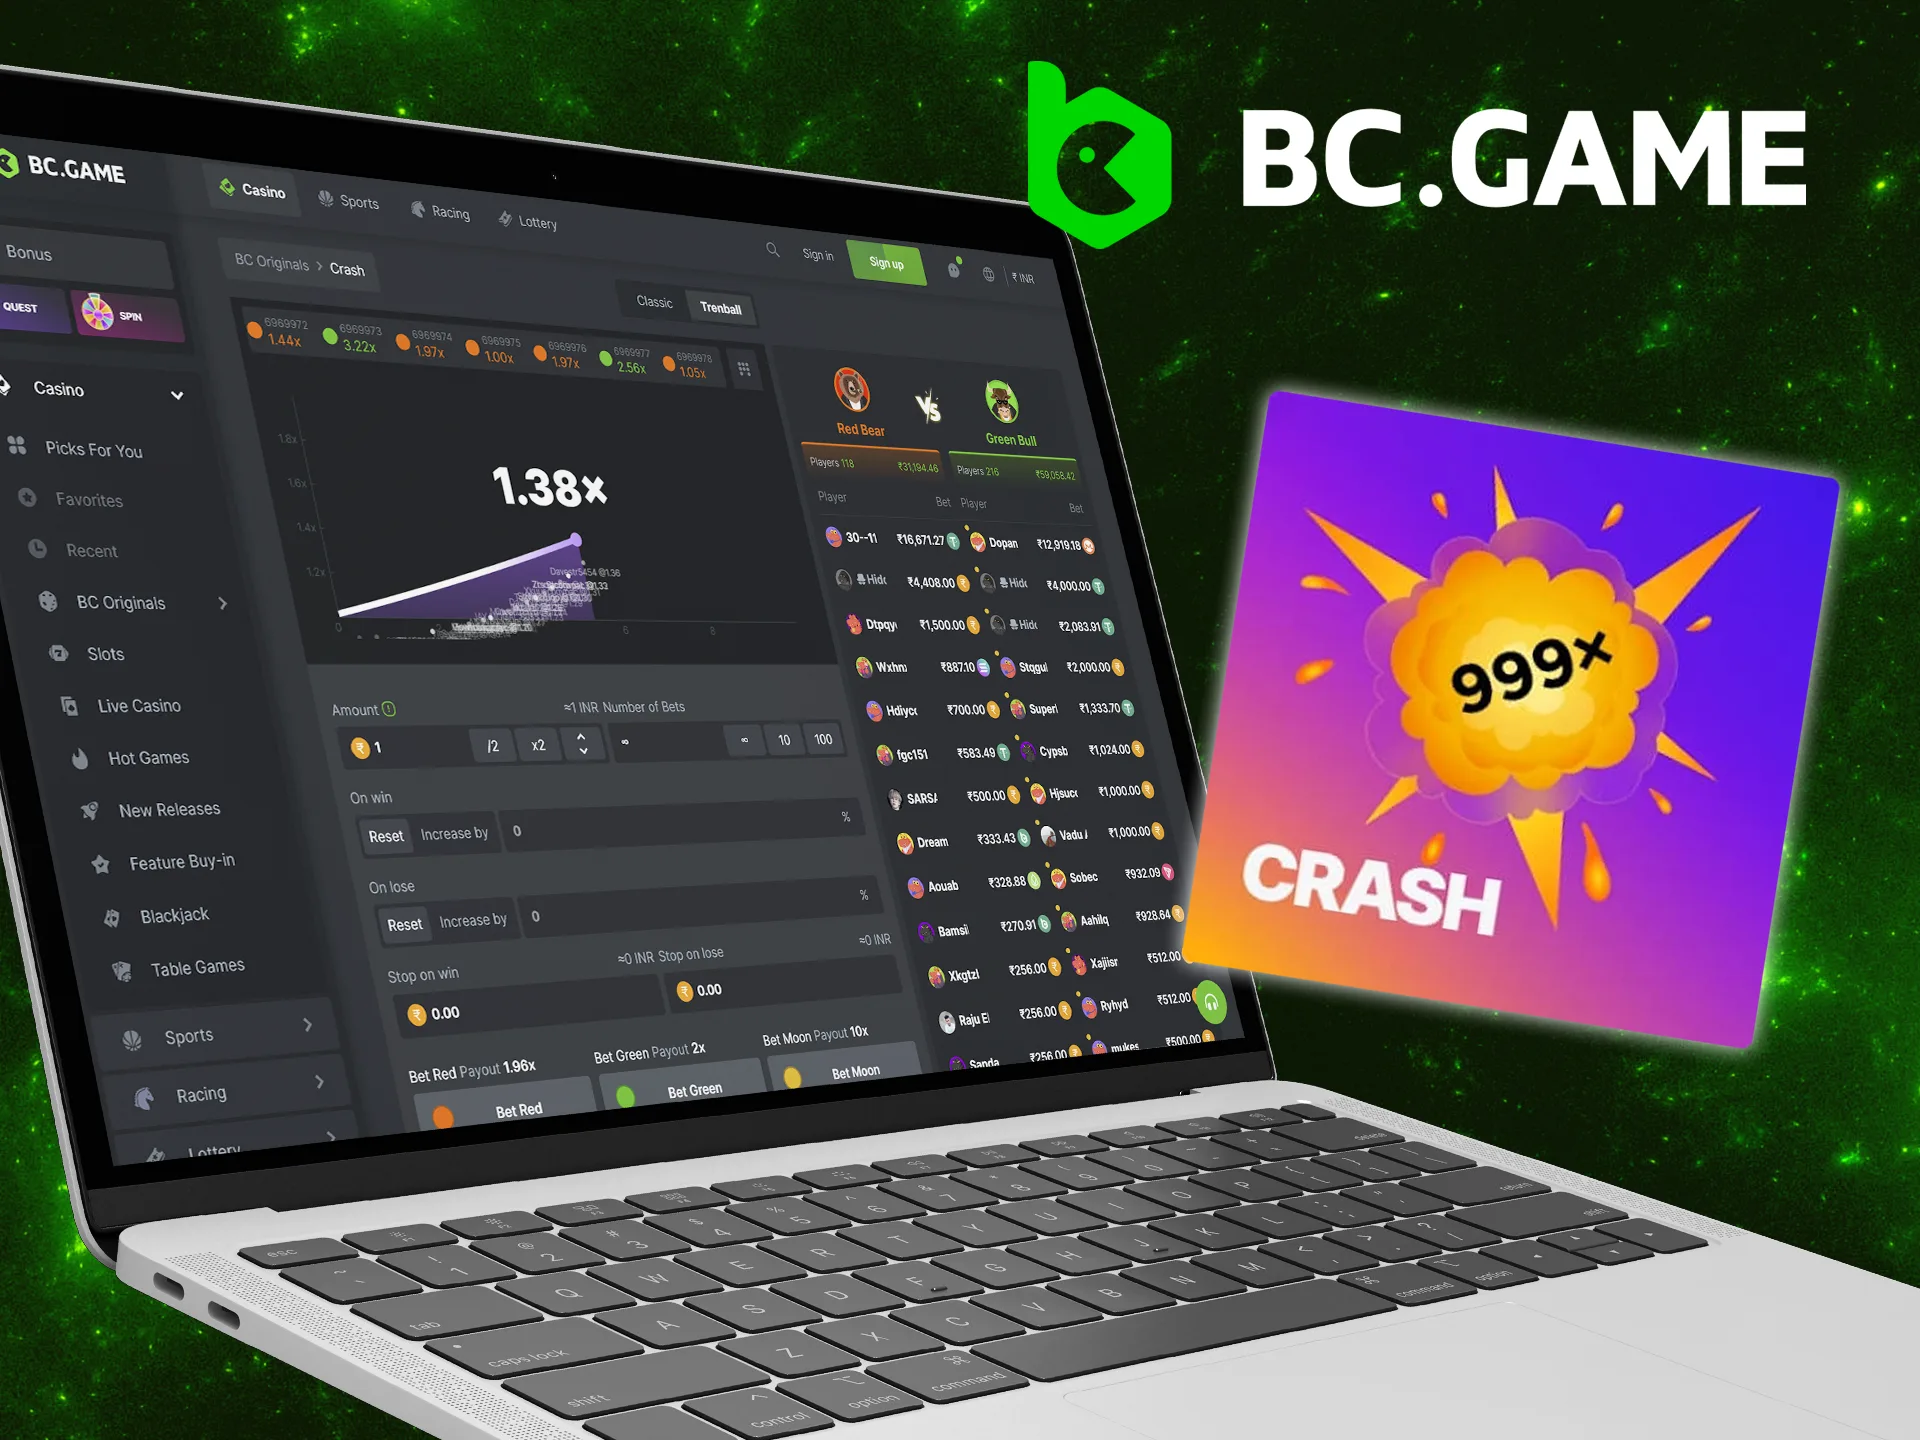 Experience the atmosphere of risk and excitement with Crash at BC Game.